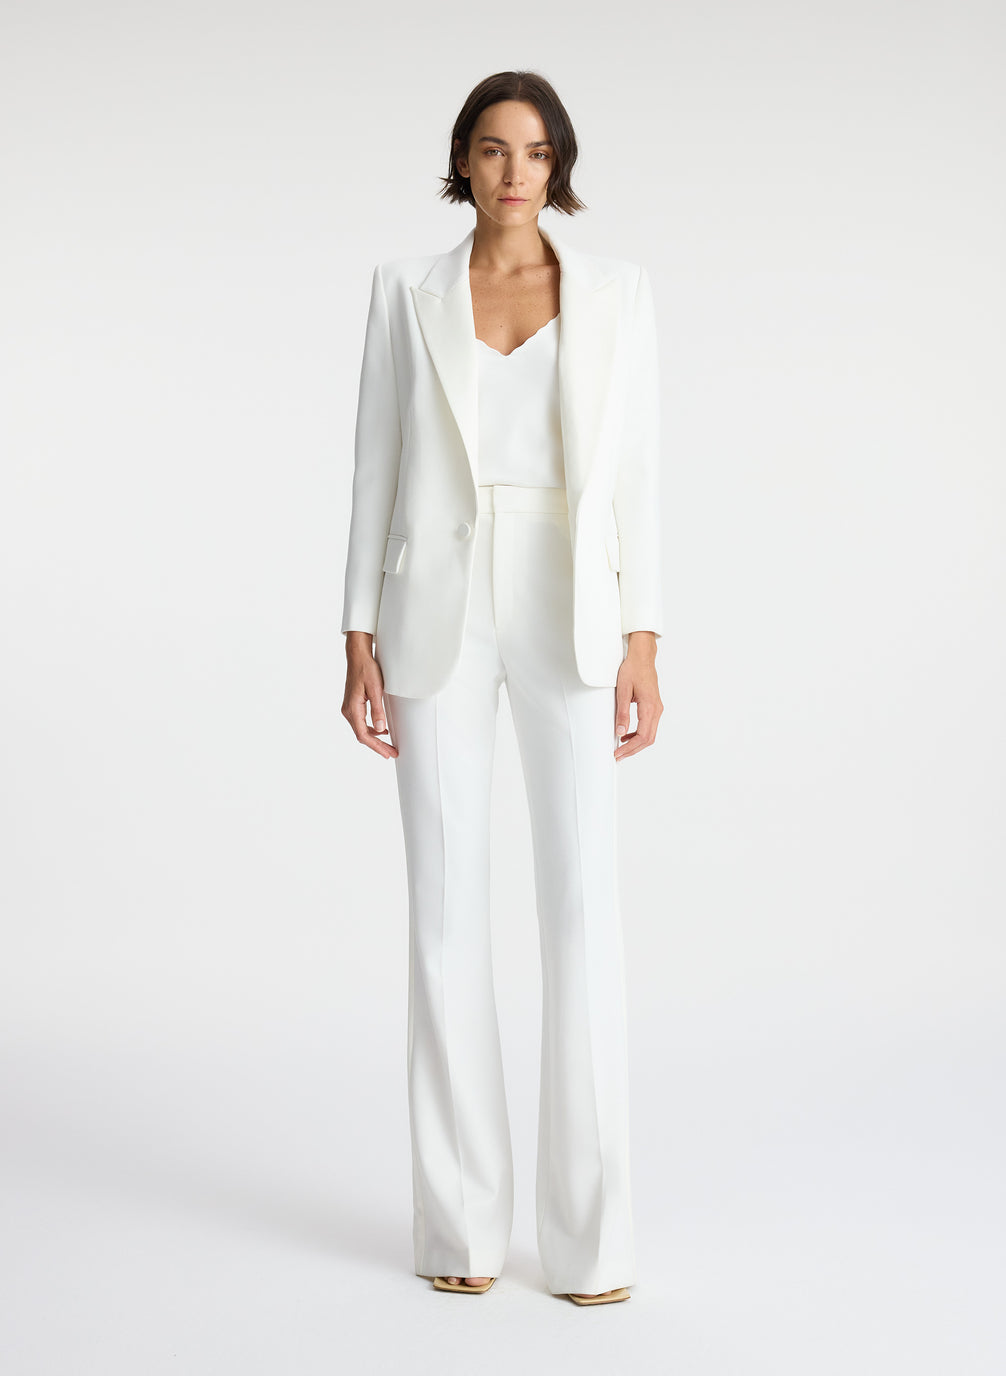 front view of woman wearing white blazer, white satin camisole, and white flared tuxedo pants